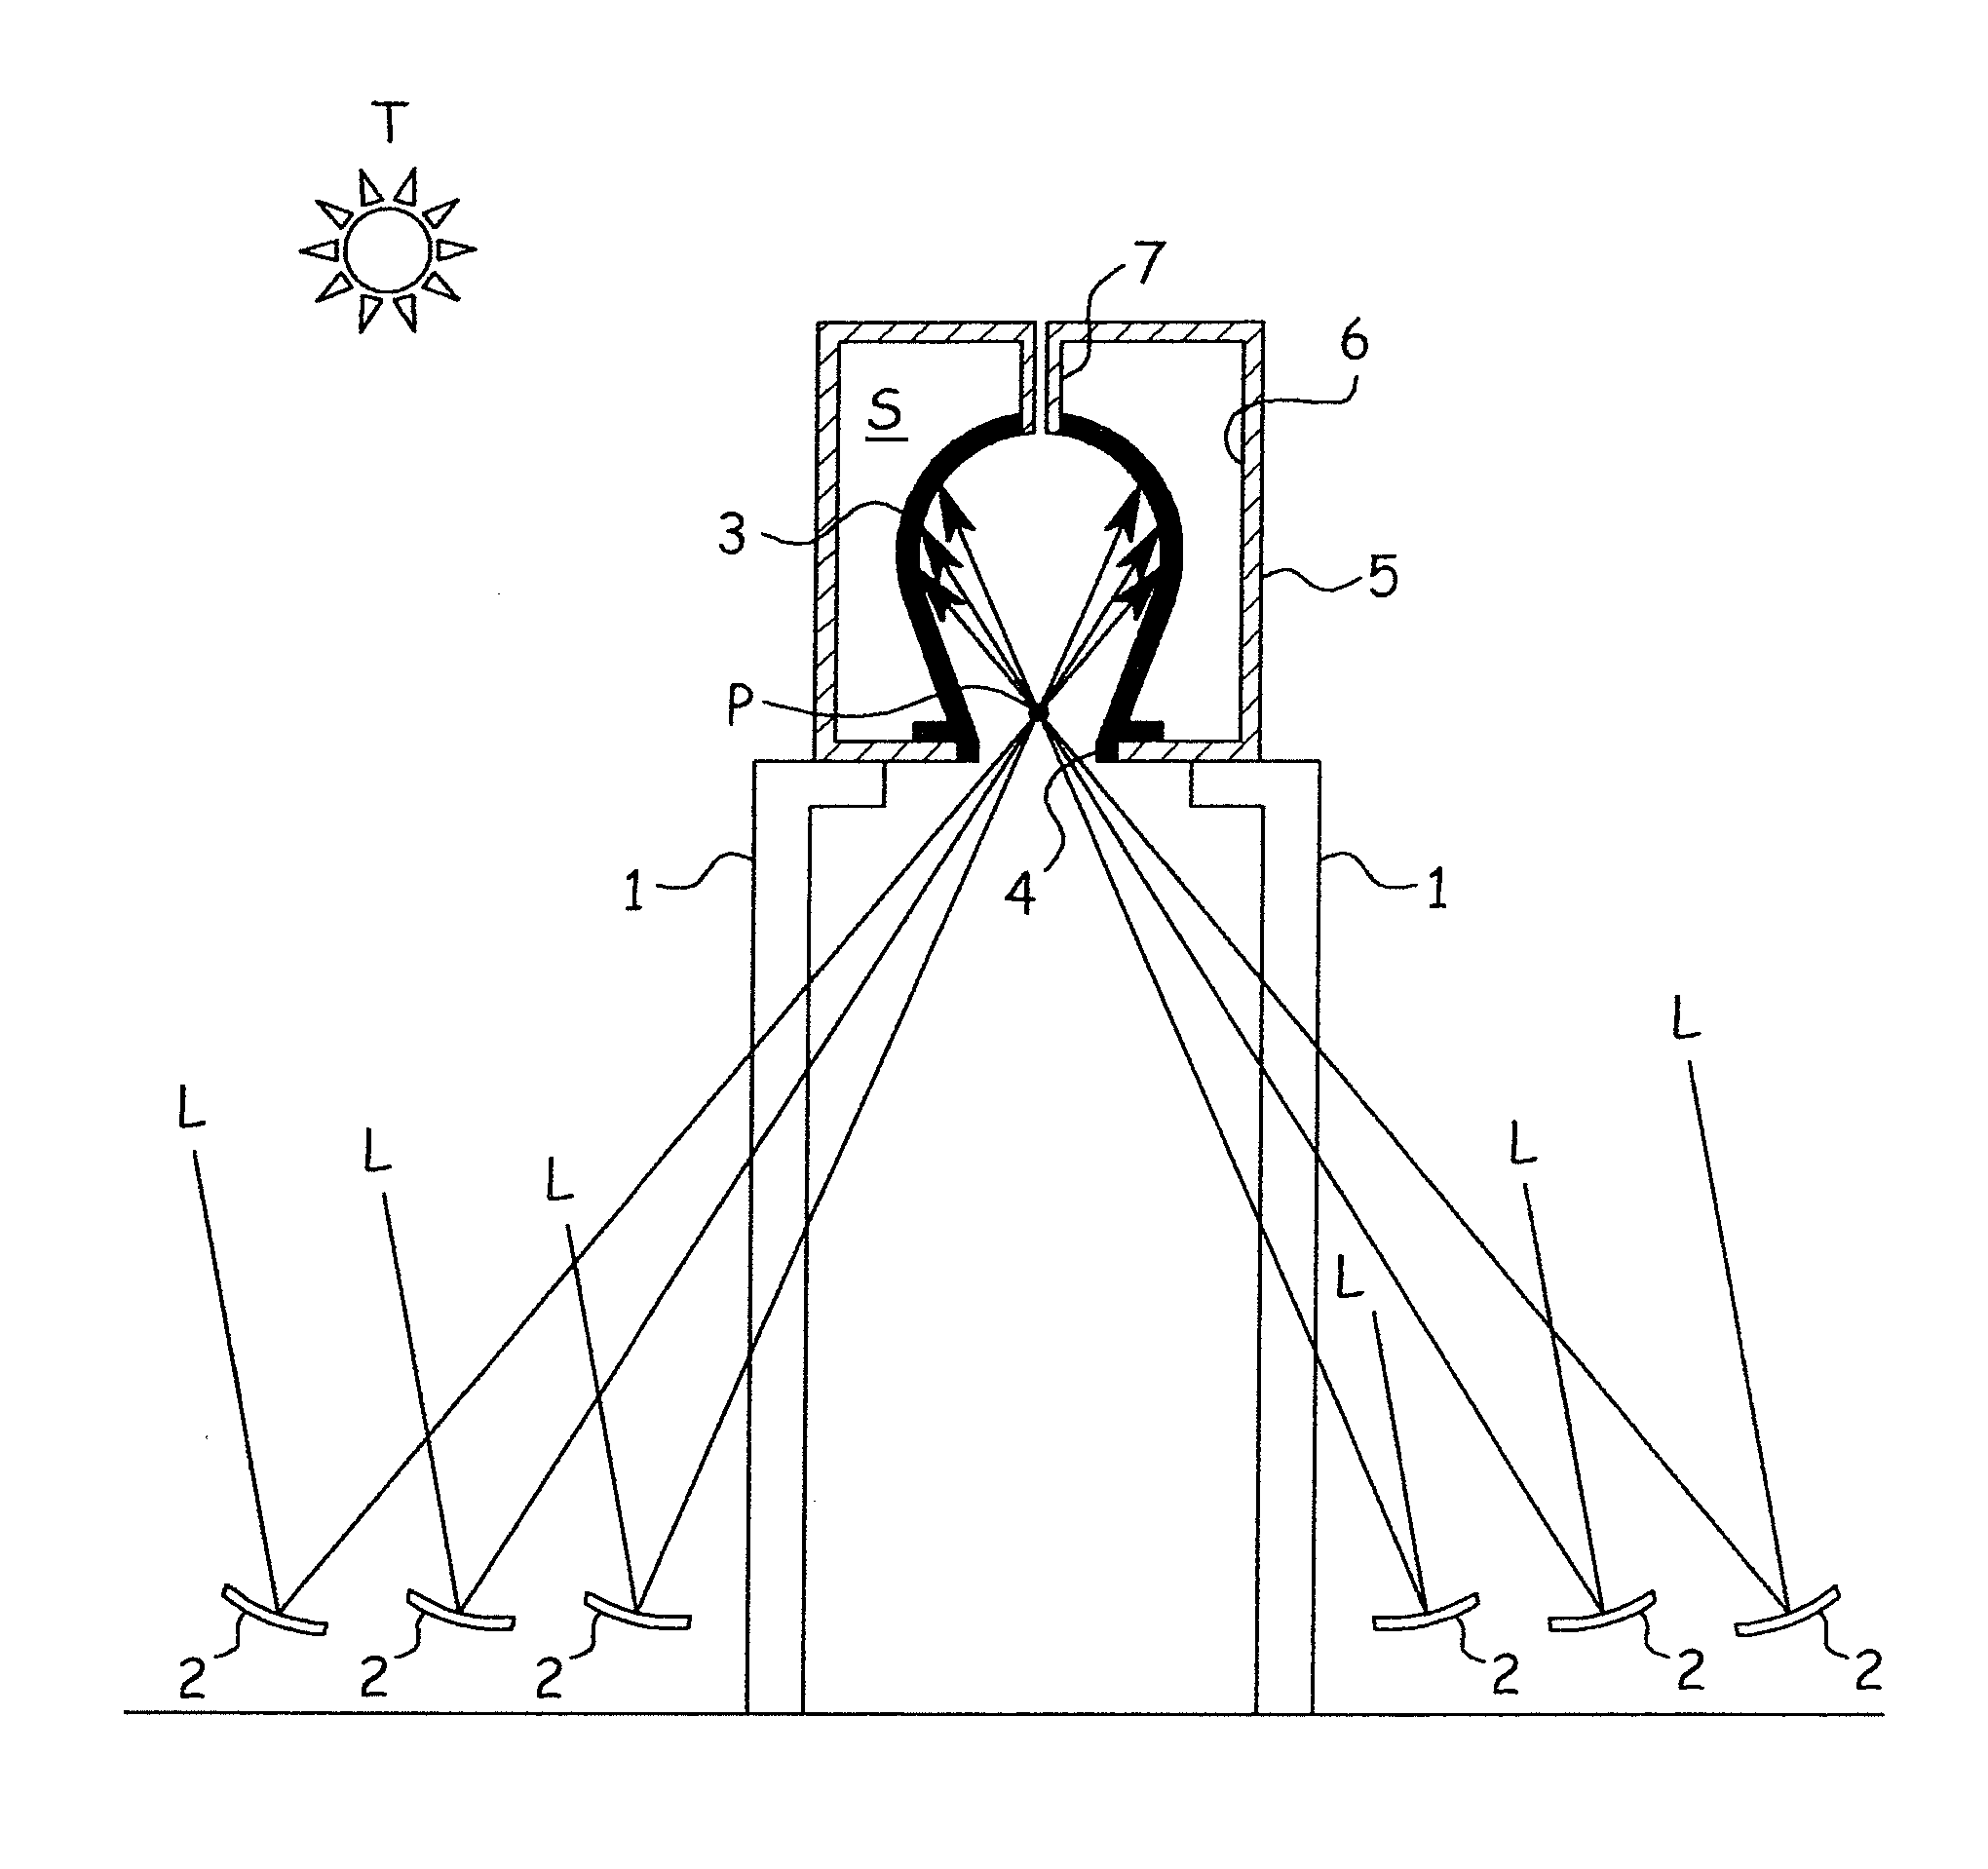 Solar power concentrating system